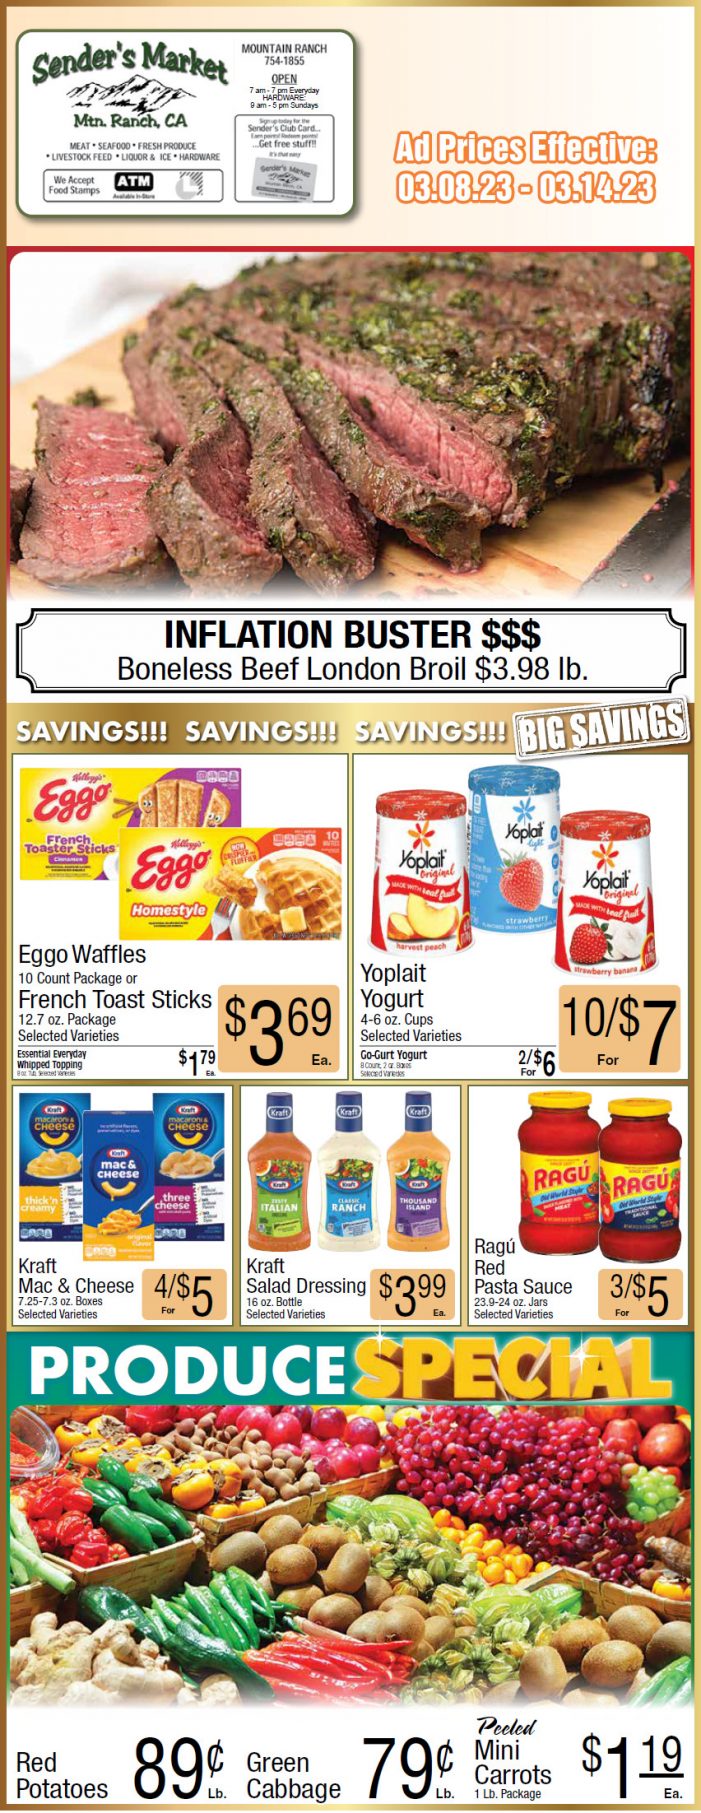 Sender’s Market Weekly Ad & Grocery Specials Through March 14th! Shop Local & Save!!